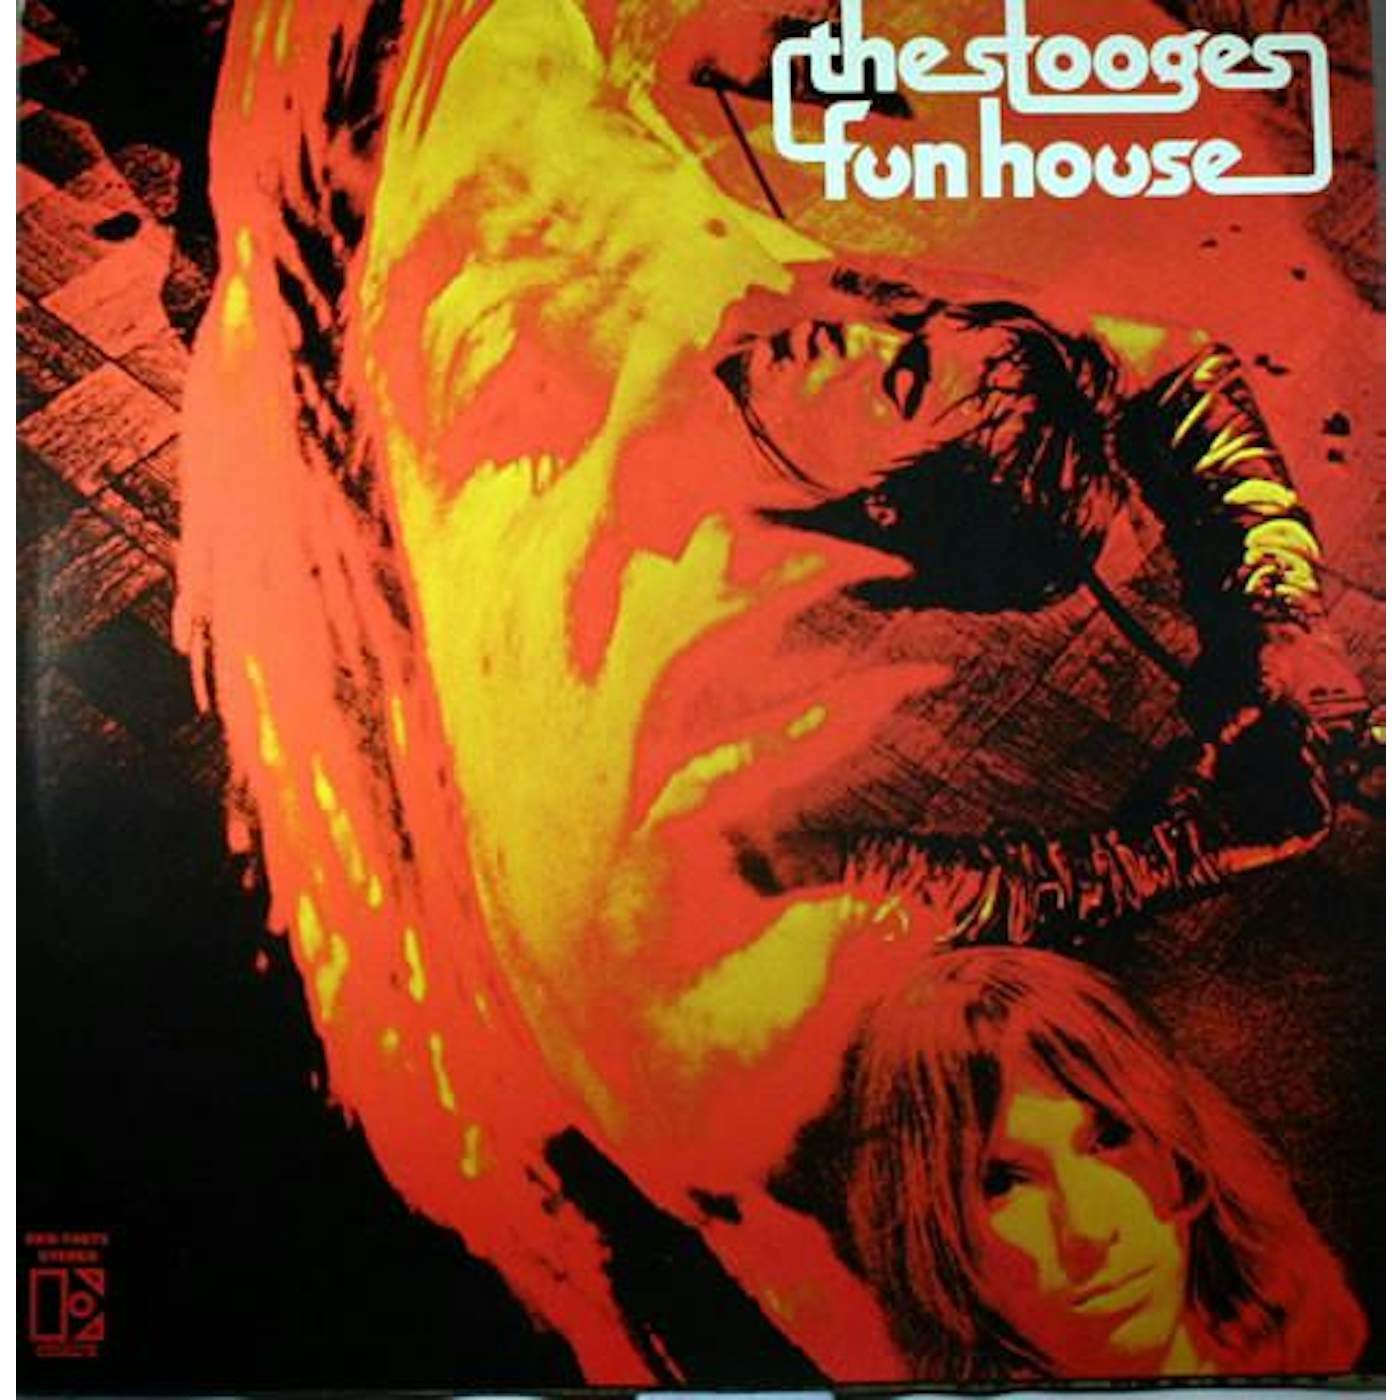 The Stooges FUN HOUSE-2LP Vinyl Record